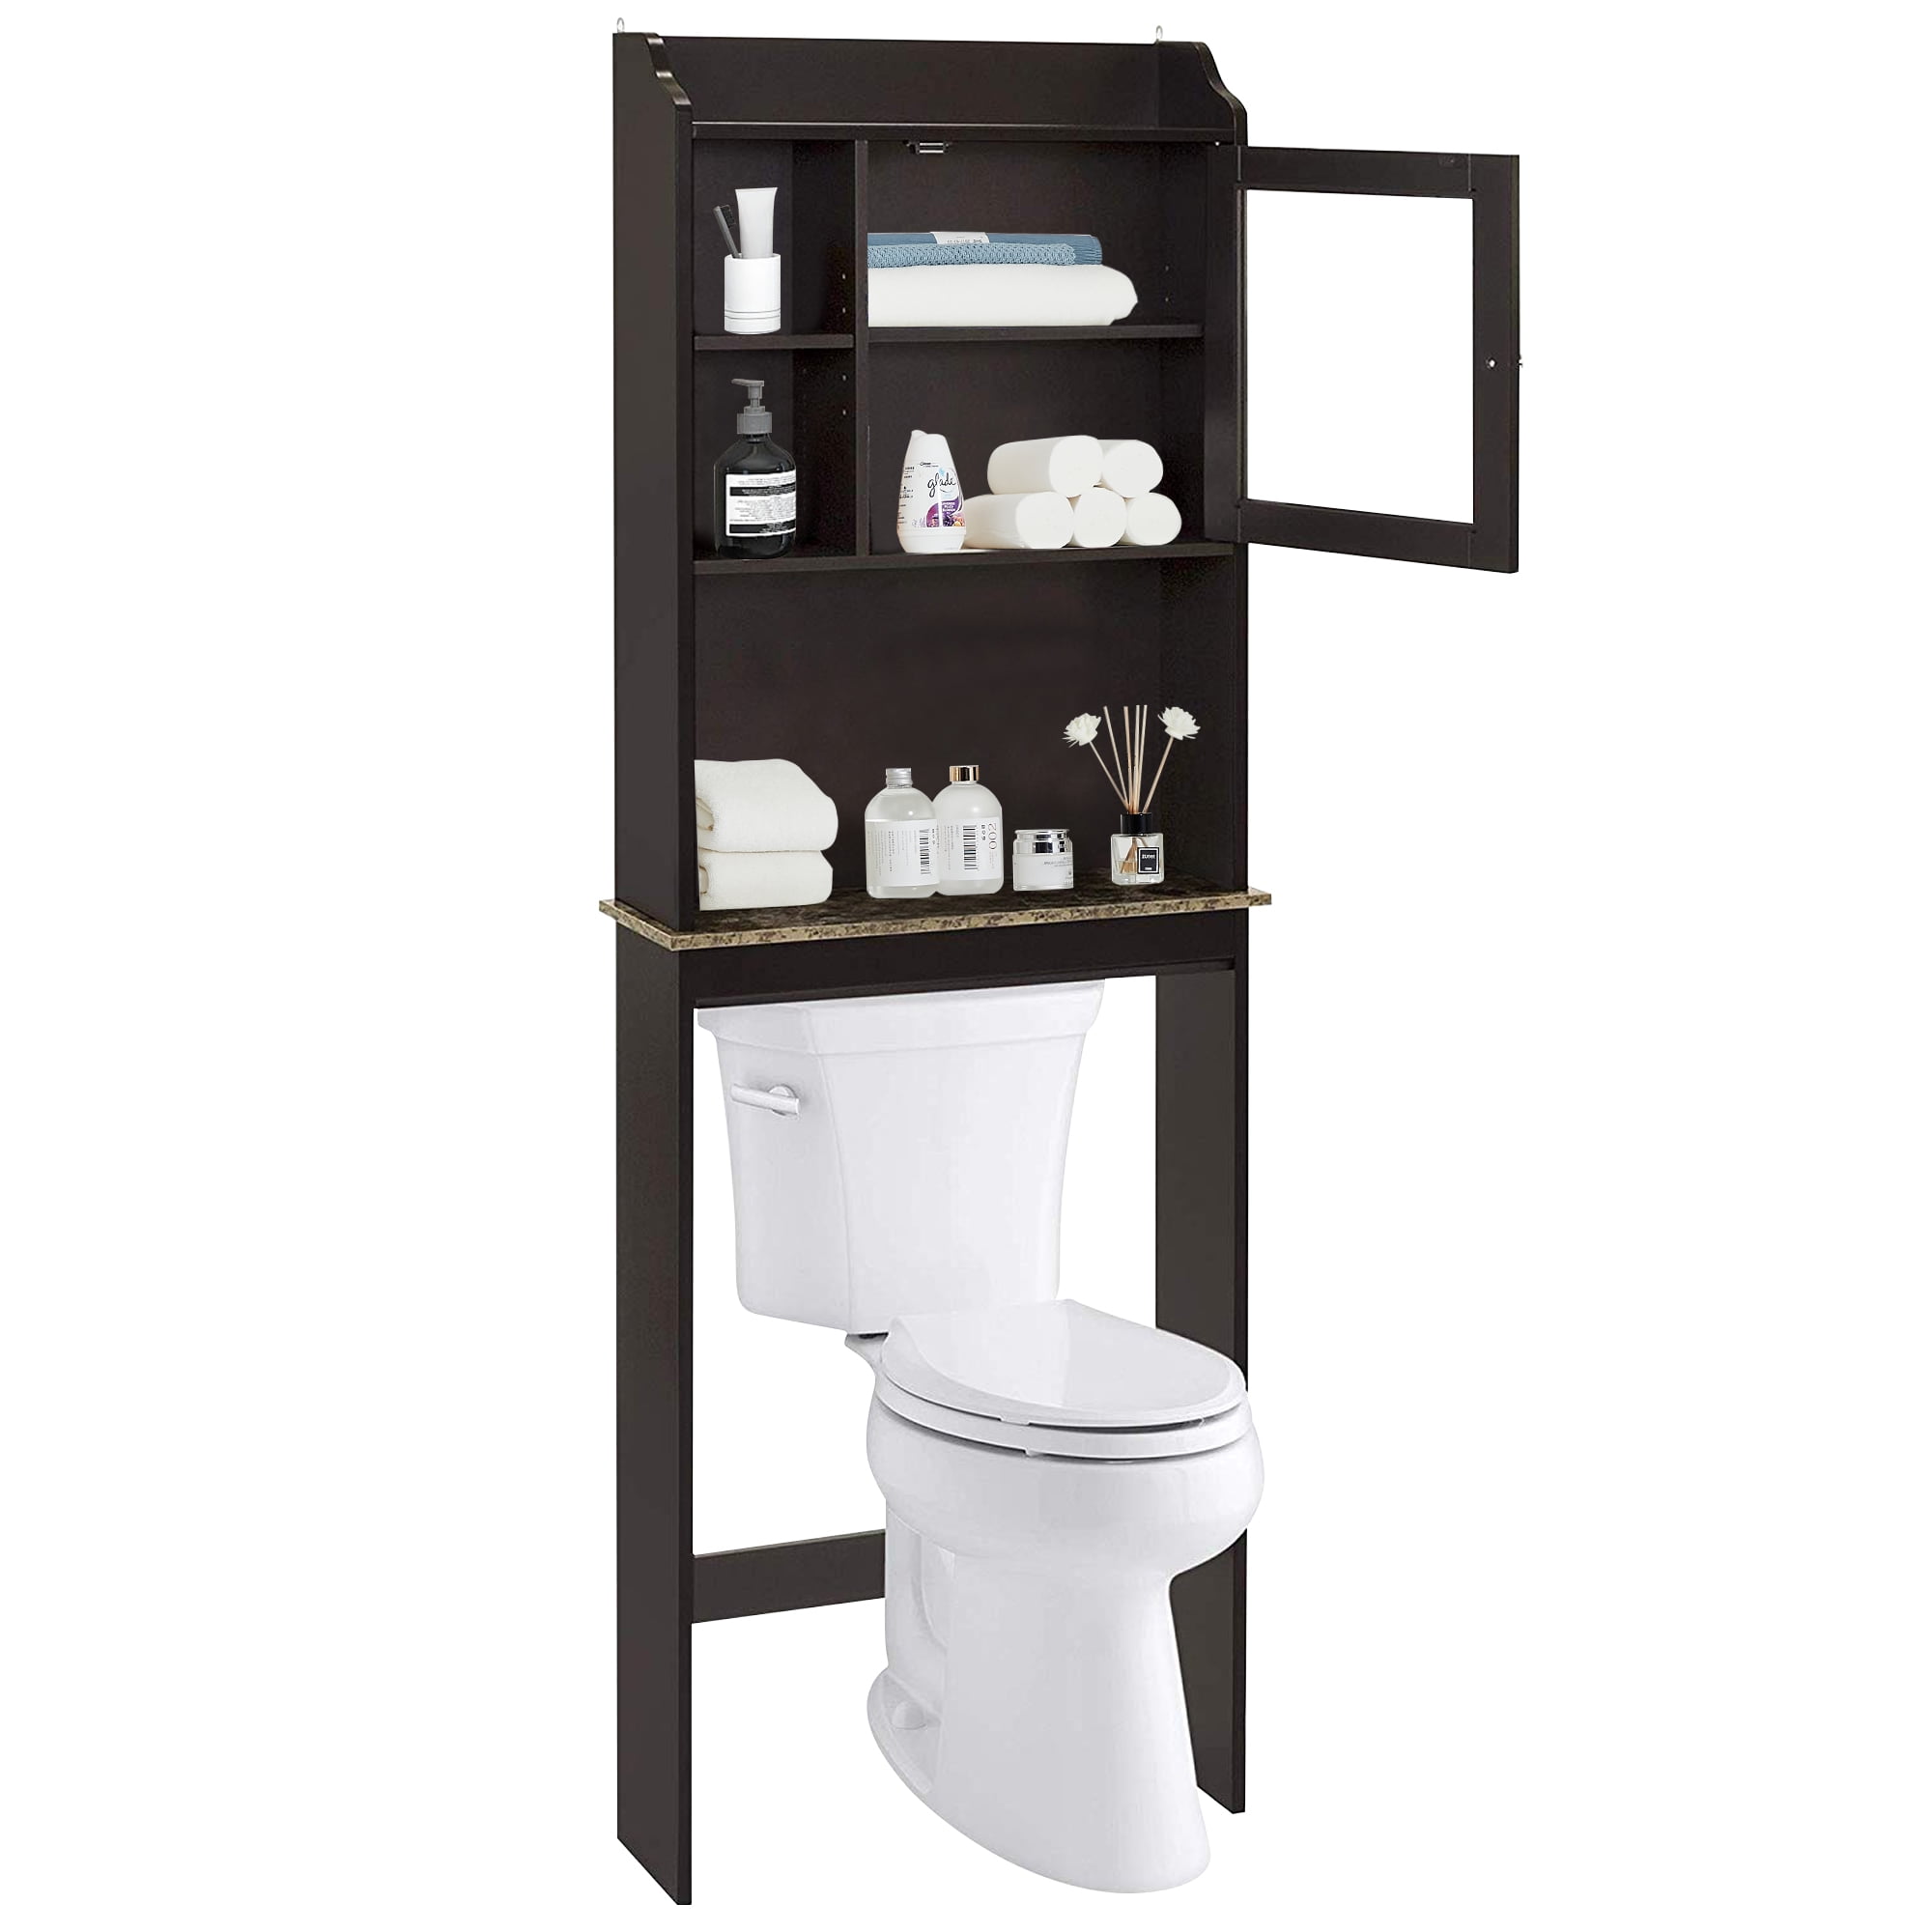 24.8 in. W x 77 in. H x 7.87 in. D White MDF Bathroom Over-the-Toilet Storage Cabinet with Doors and Shelves